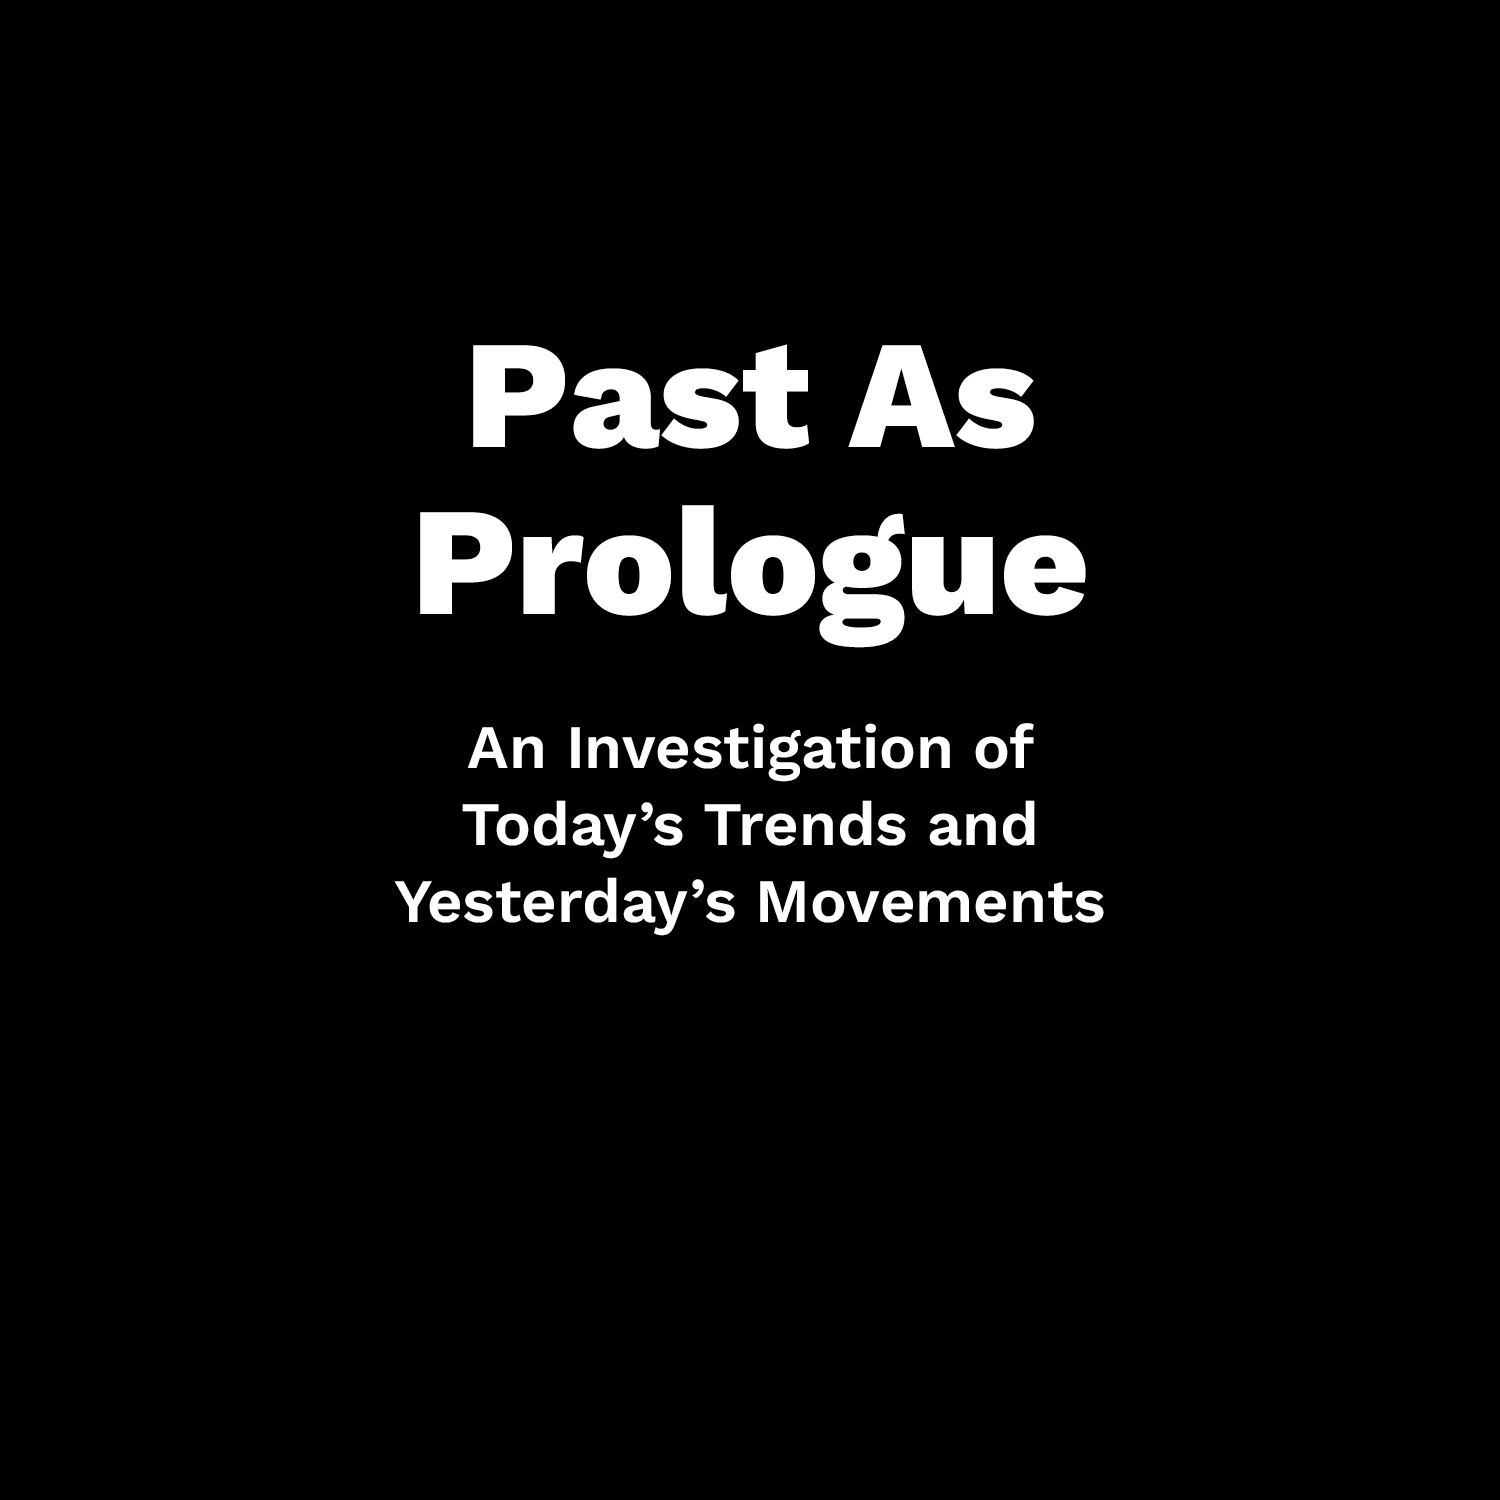 Past As Prologue: An Investigation of Today's Trends and Yesterday's Movements